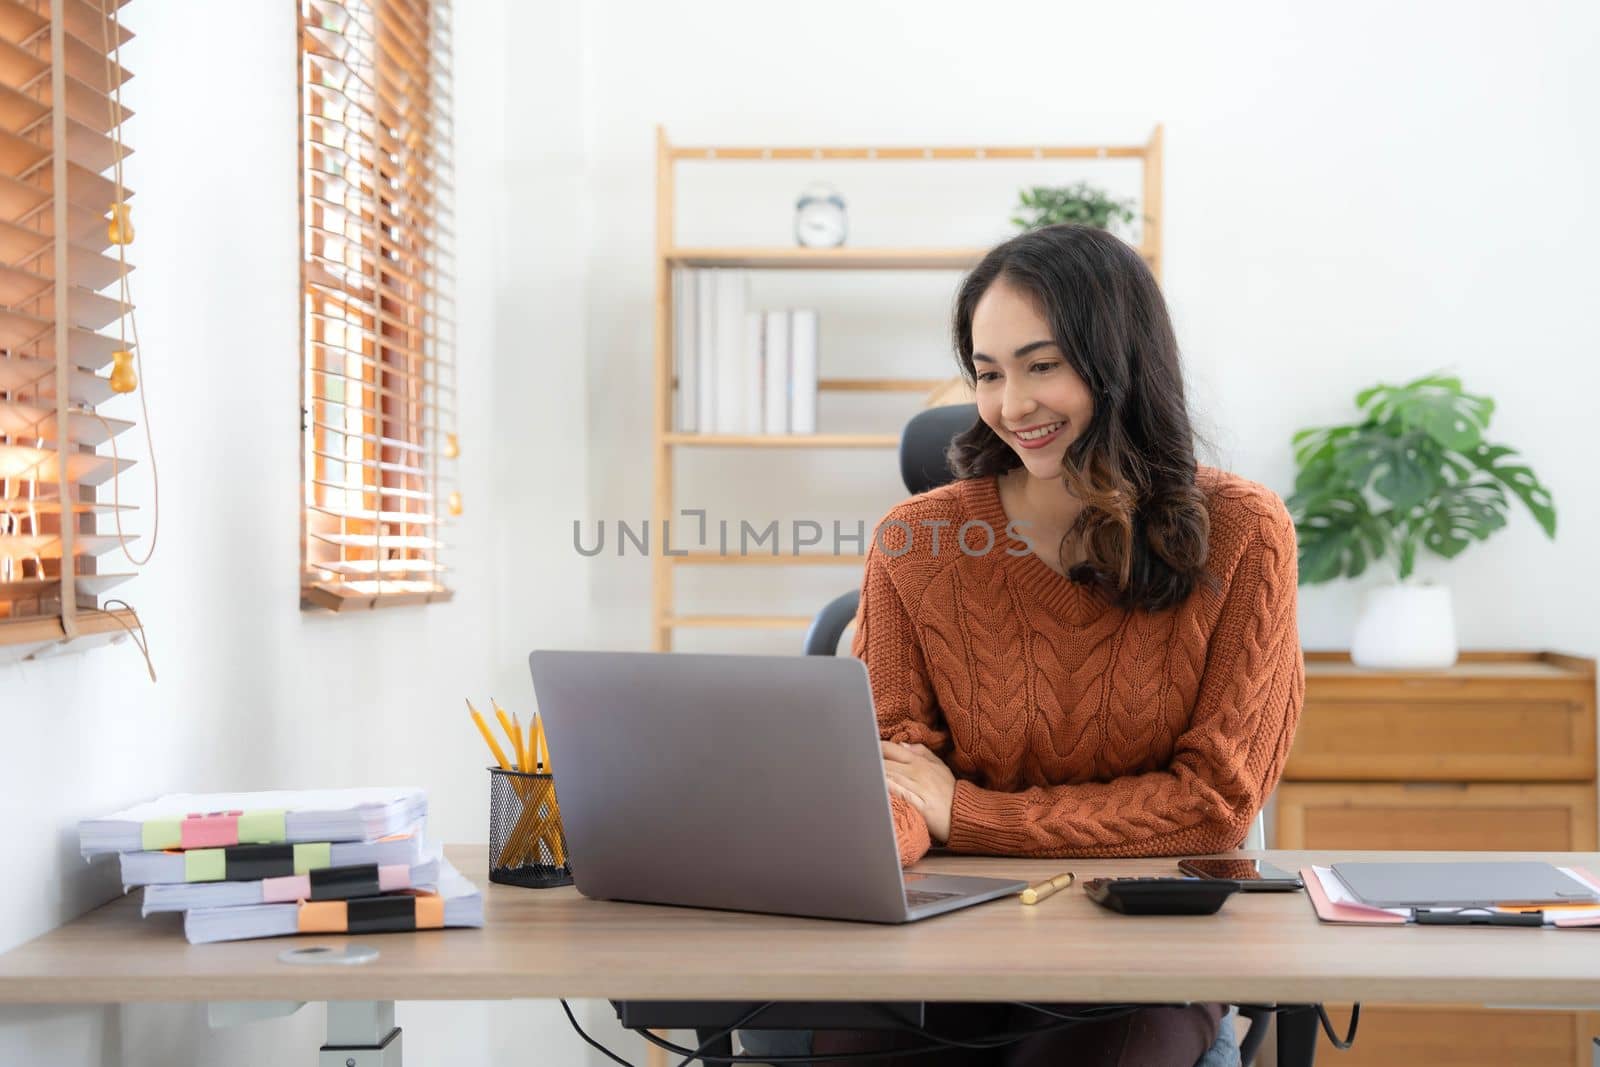 Focused Indian woman using laptop at home, looking at screen, chatting, reading or writing email, sitting on couch, serious female student doing homework, working on research project online.